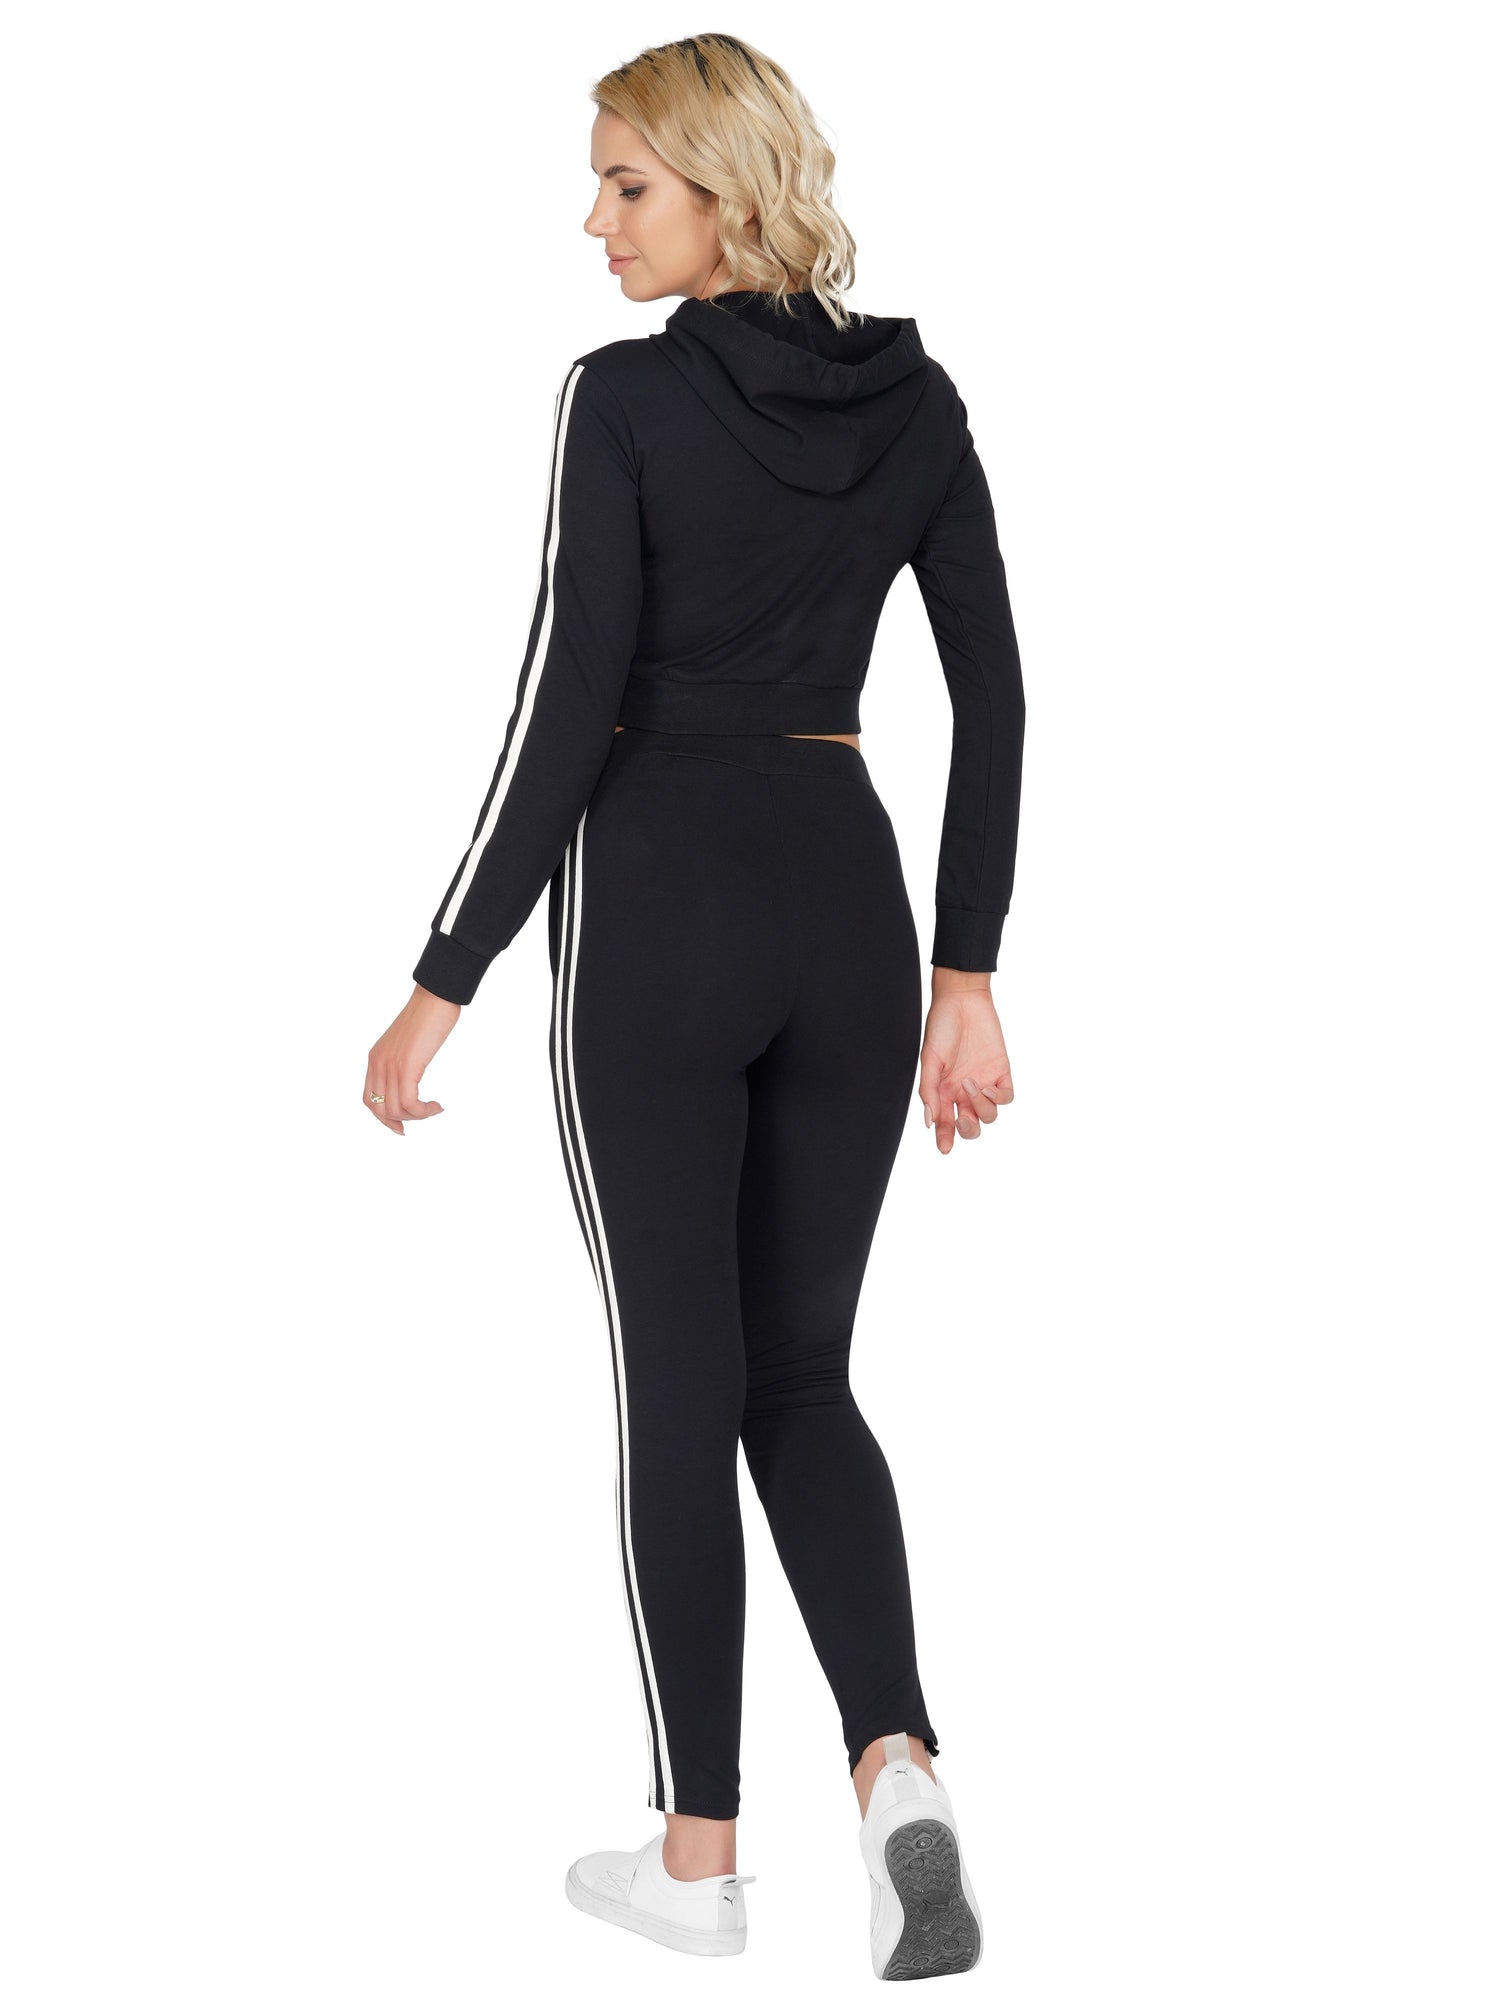 SLAY. Sport Women's Black Printed Tracksuit with White Side Stripes-clothing-to-slay.myshopify.com-Tracksuit